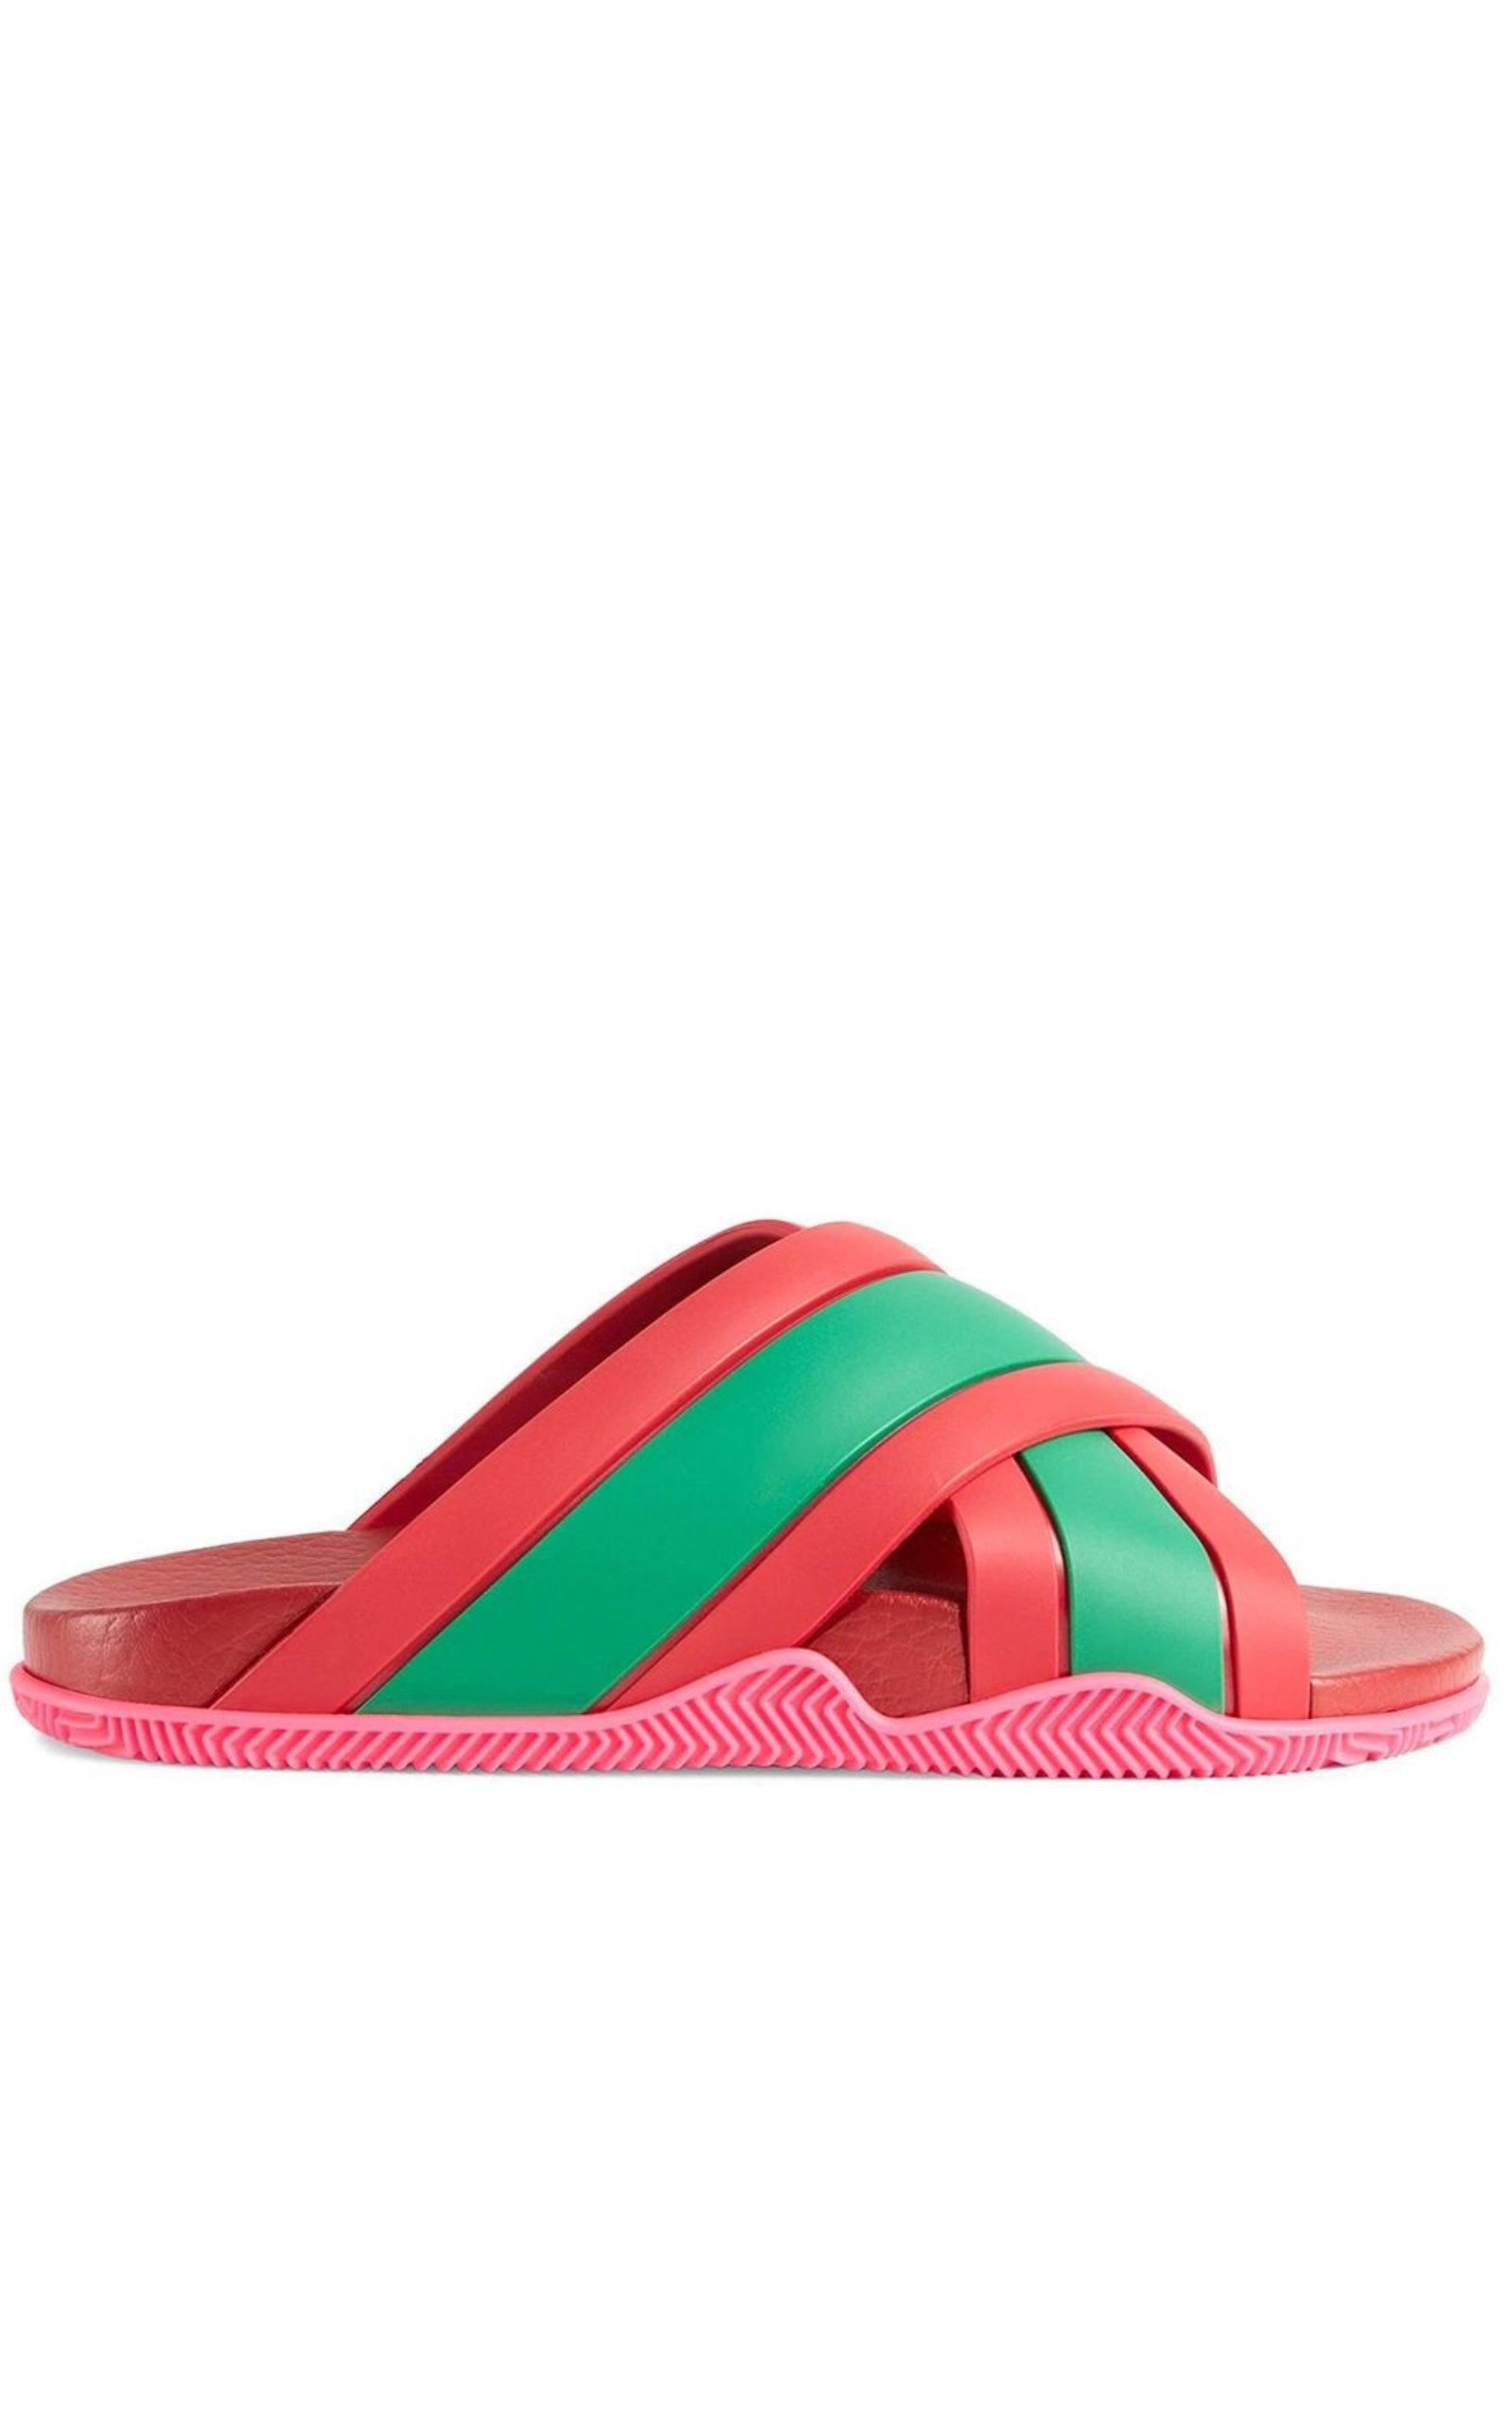 Gucci Web & Leather Thong Sandals Green/Red